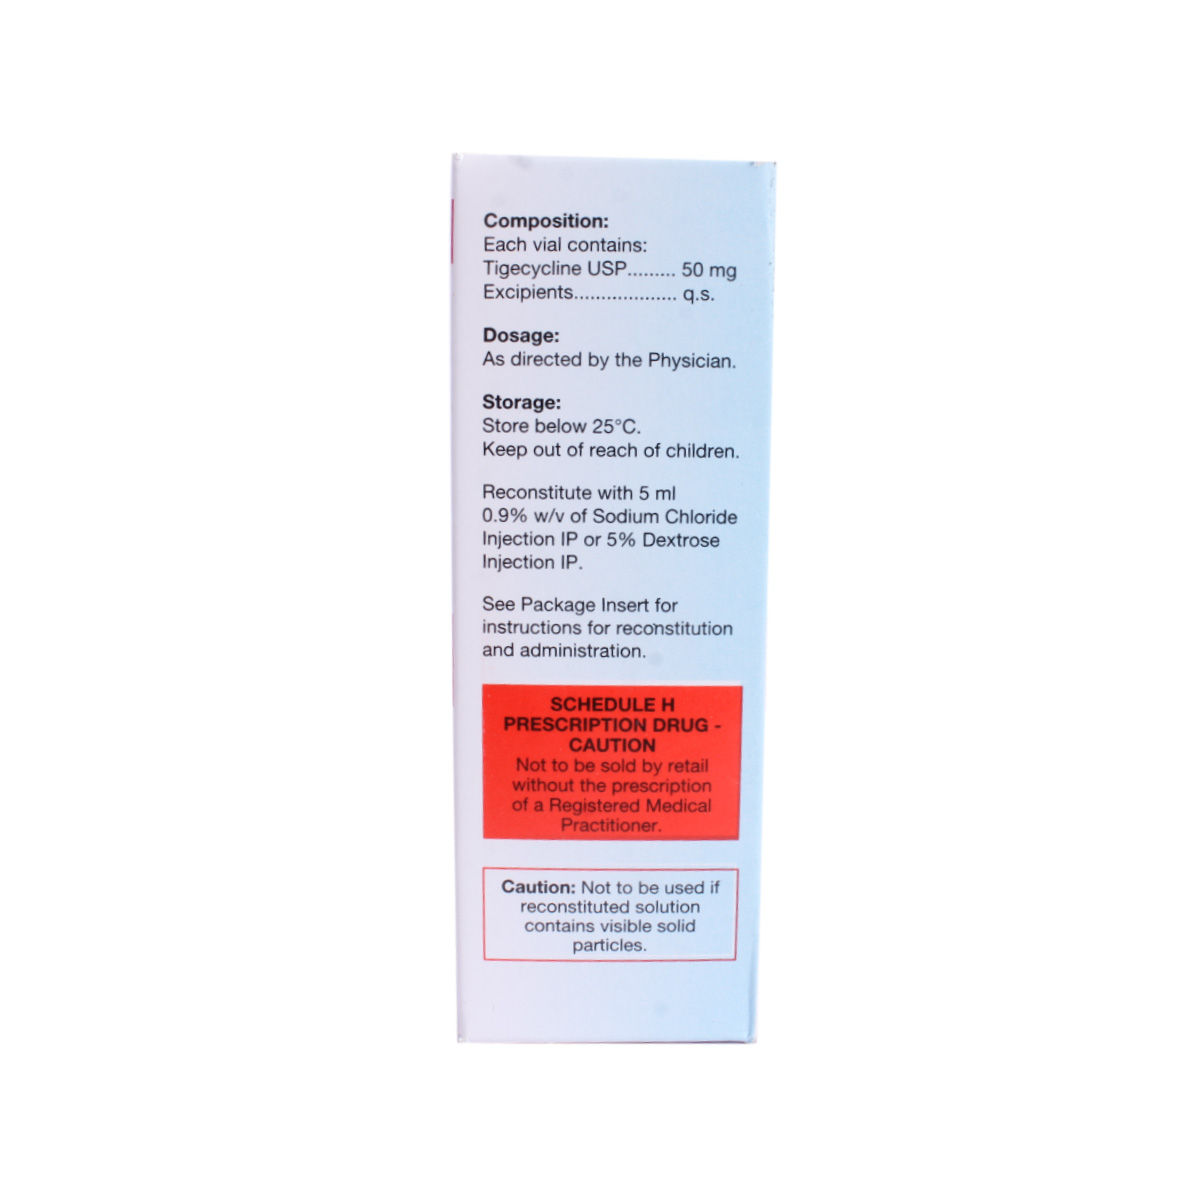 TYGARAY 50MG INJECTION, Pack of 1 INJECTION